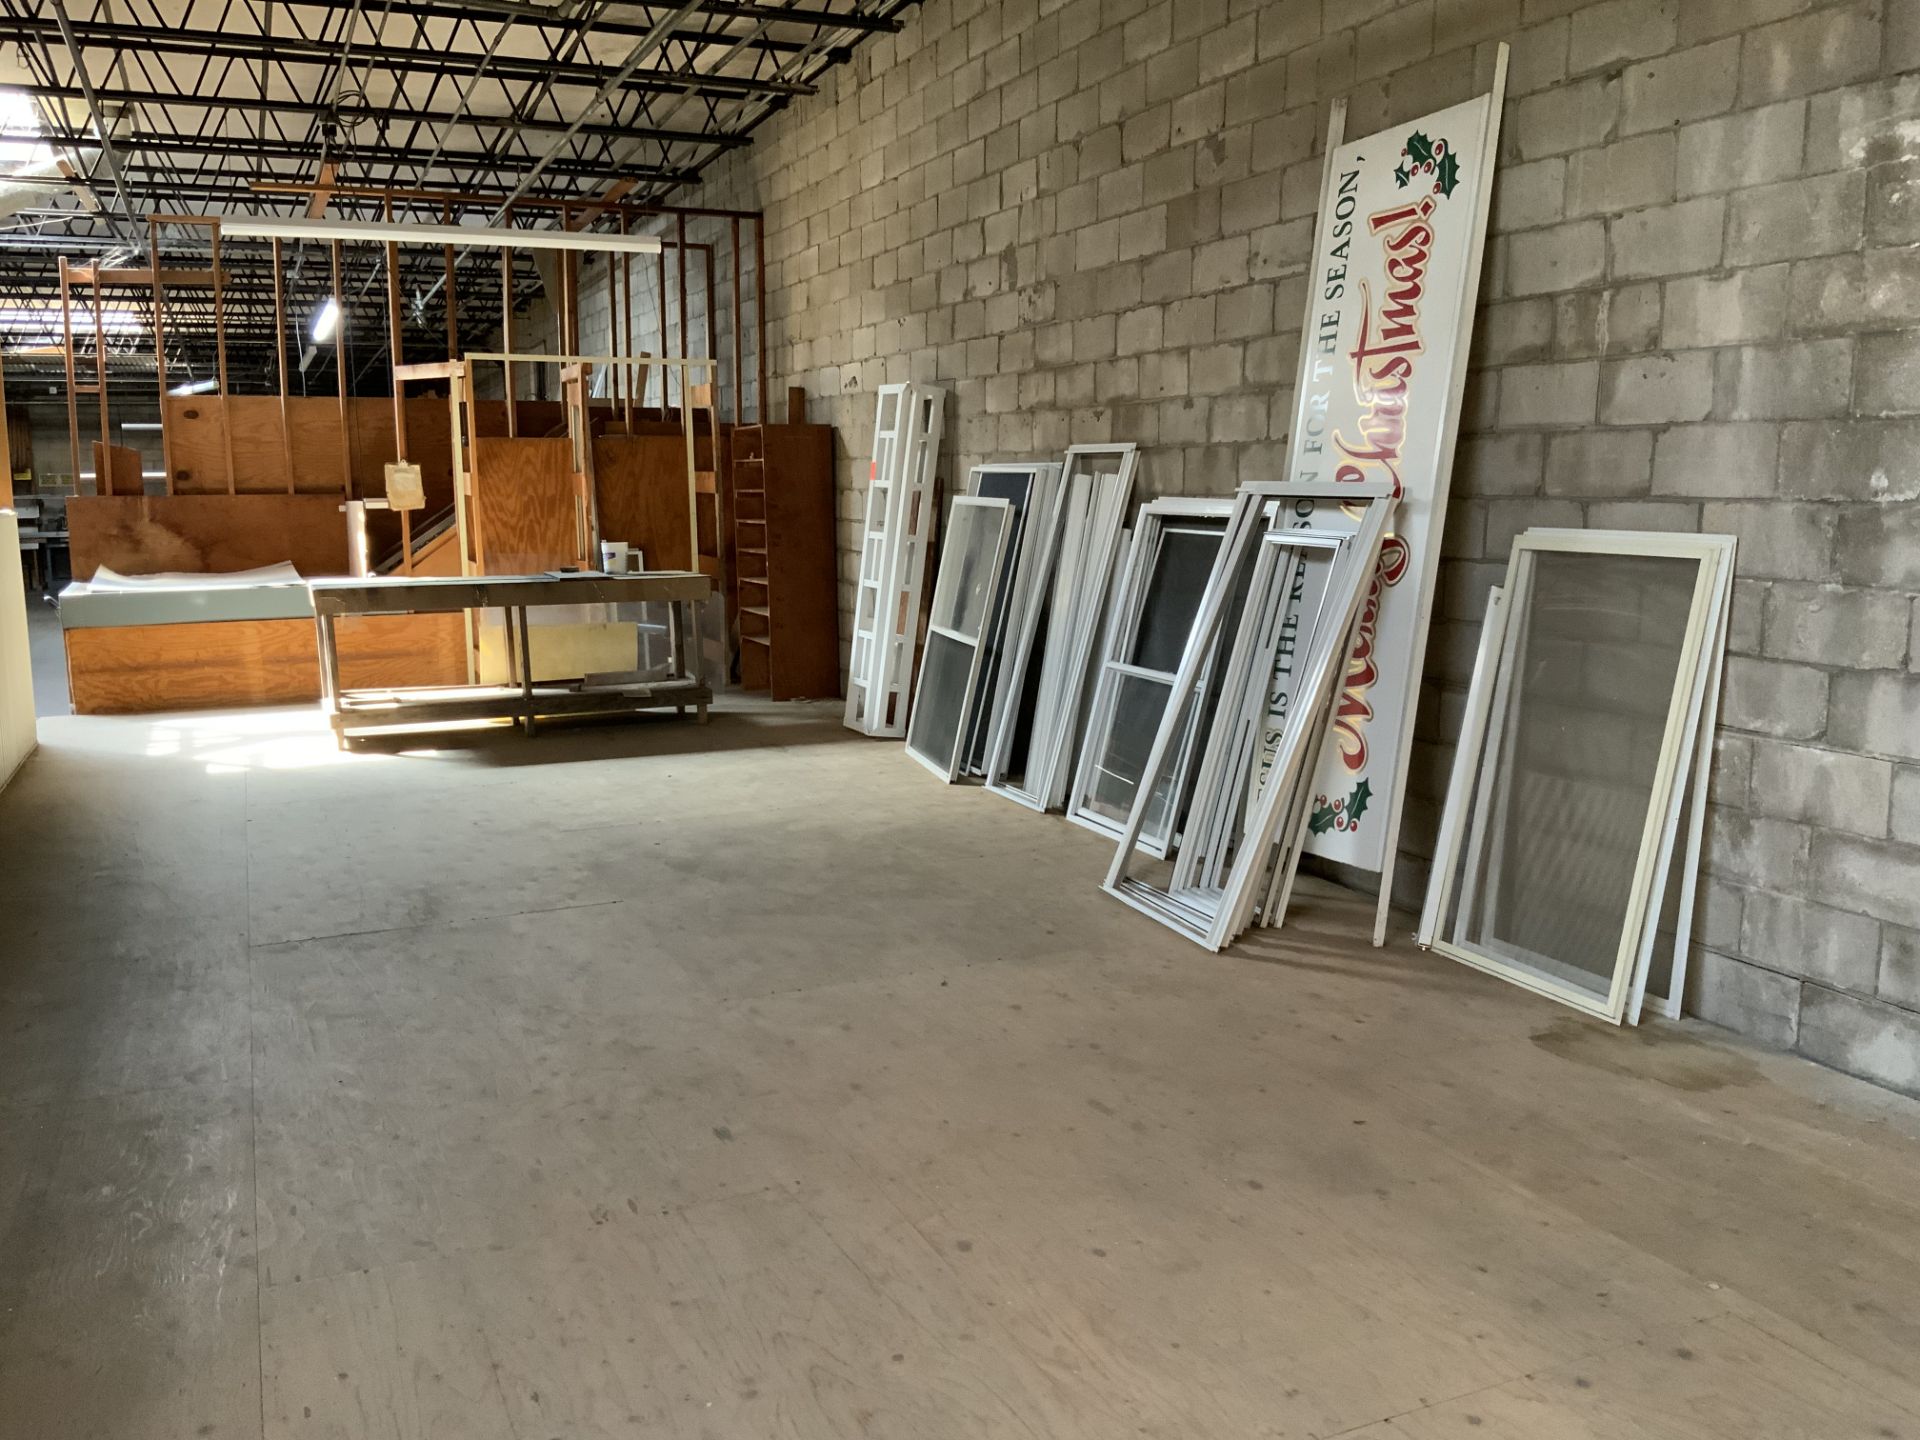 Collection of Folding Chairs, Windows, Doors, Signs, etc.